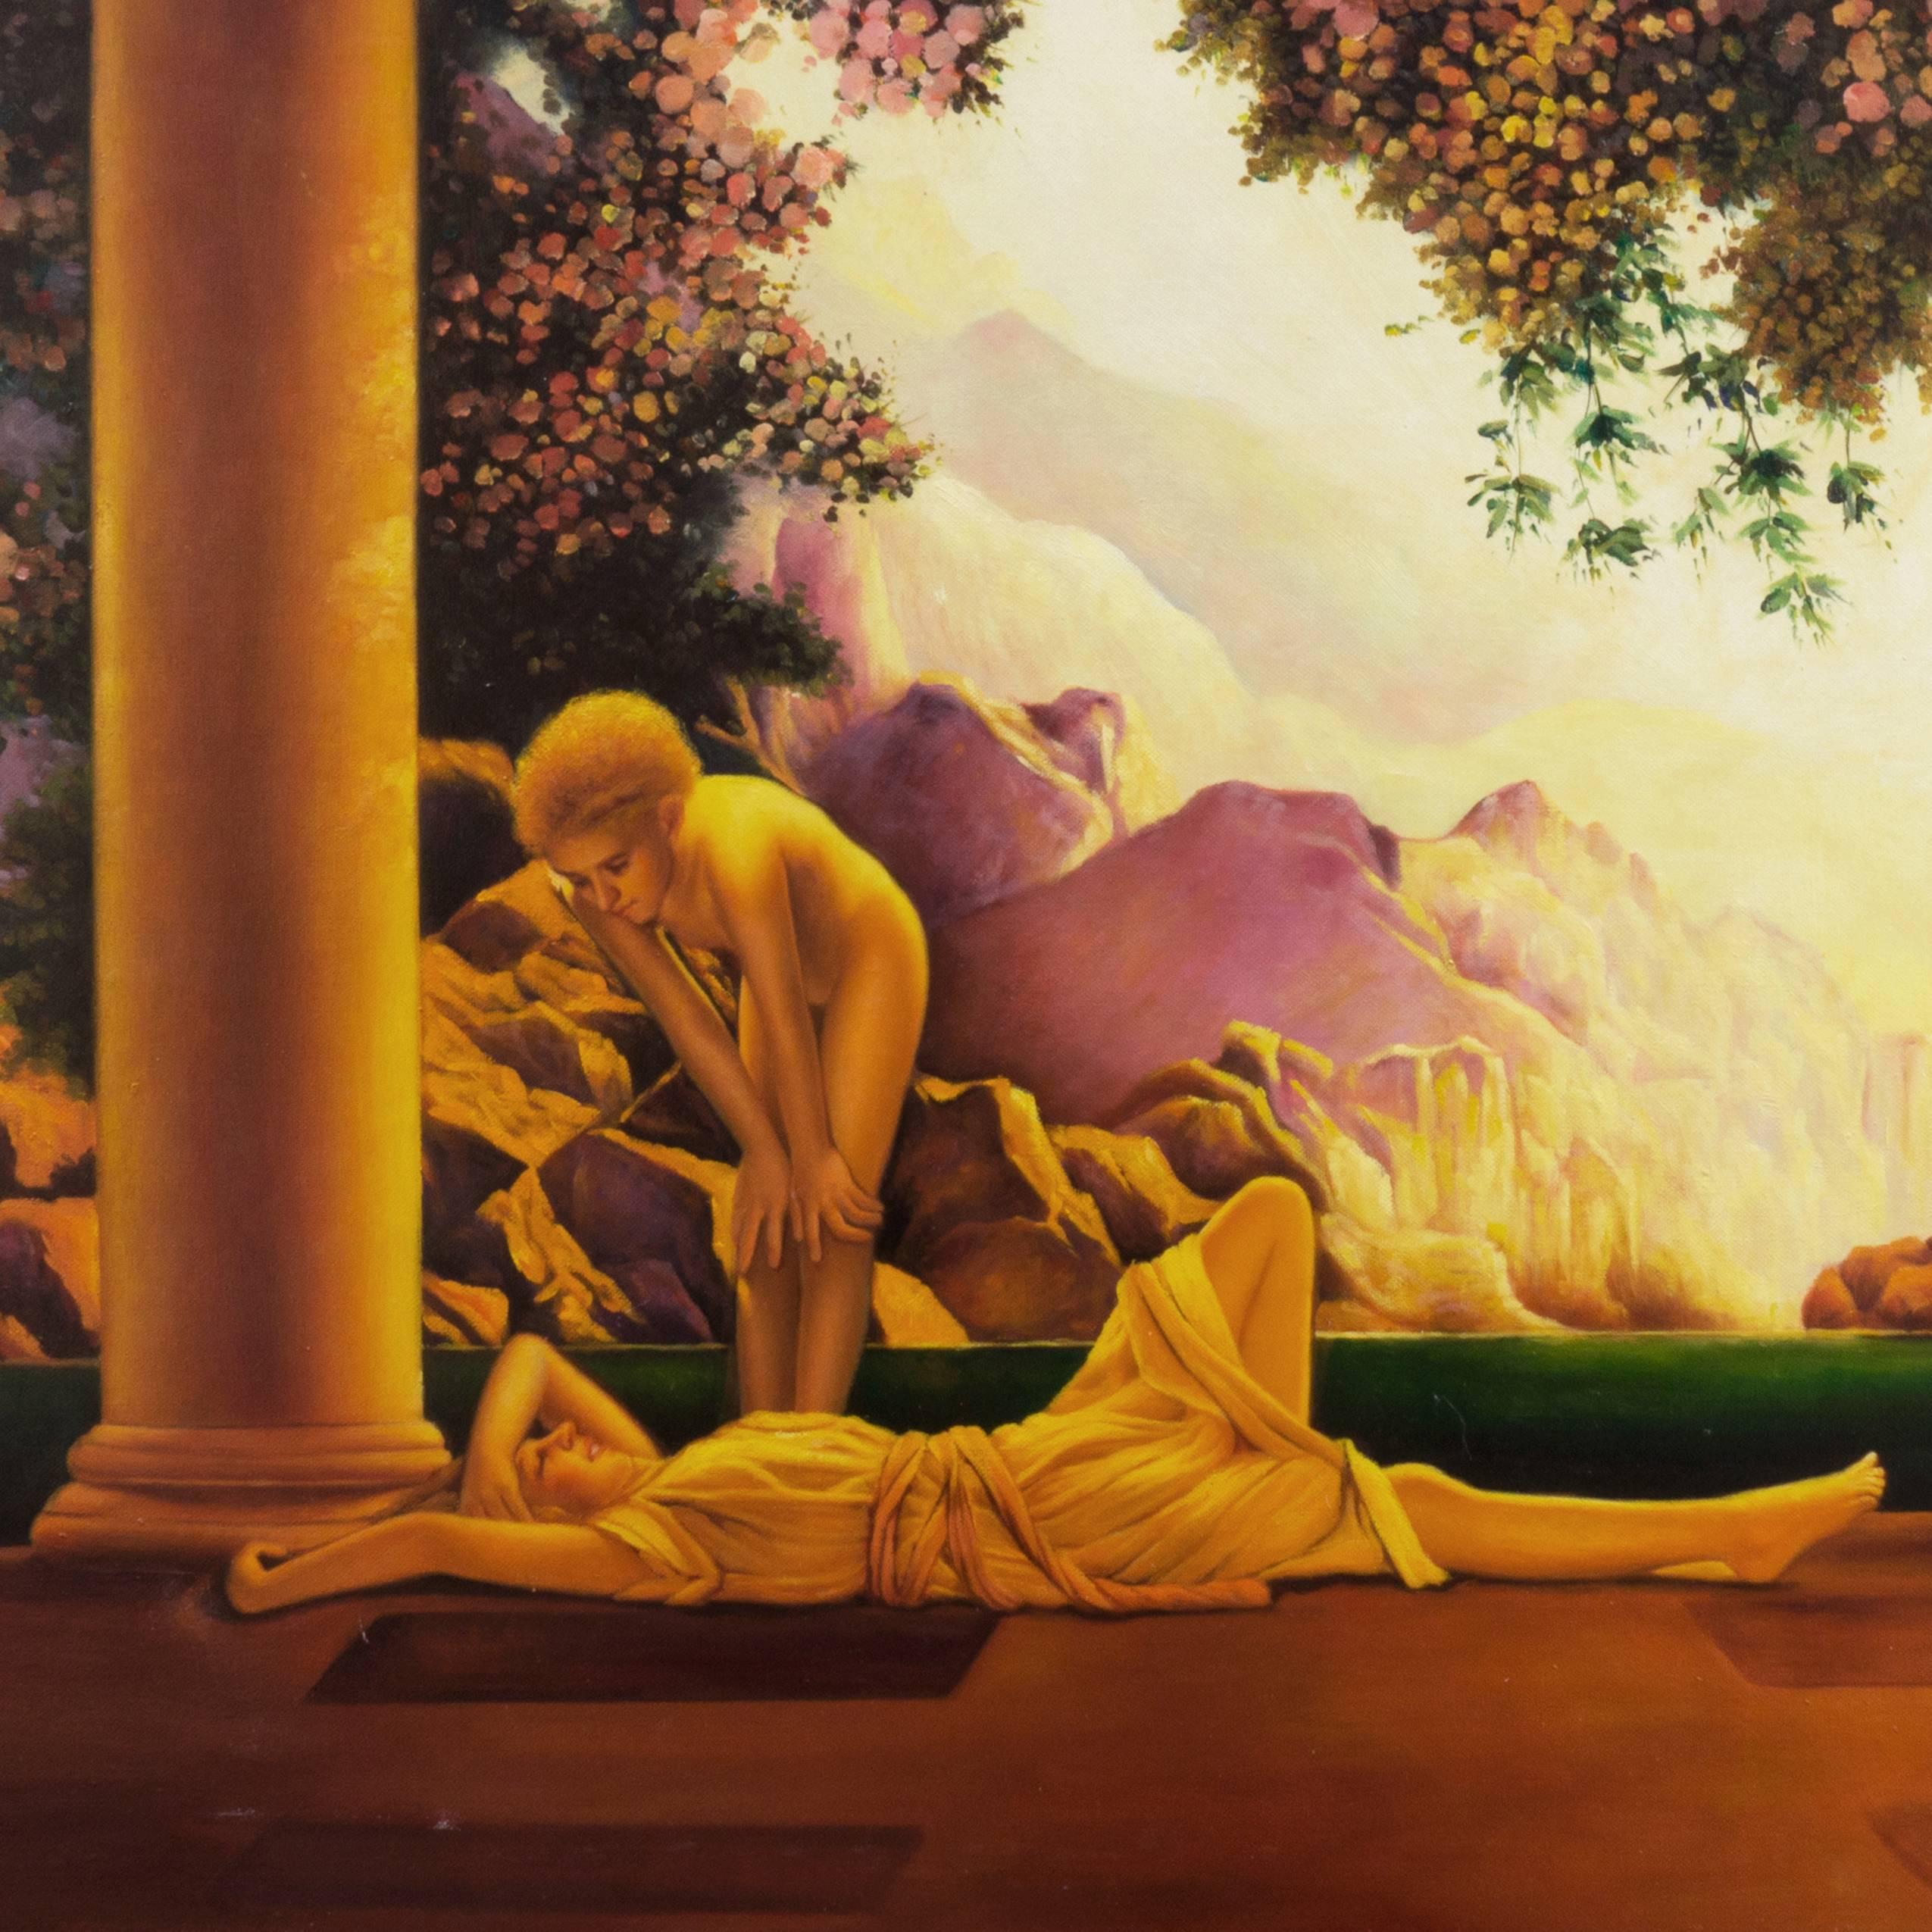 Signed lower right, 'Alfred Bendiner' and painted circa 1935. 

A substantial, light-filled oil landscape showing a nymph reclining beneath the columns of a neoclassical temple with her companion standing beside her and a view beyond to golden,